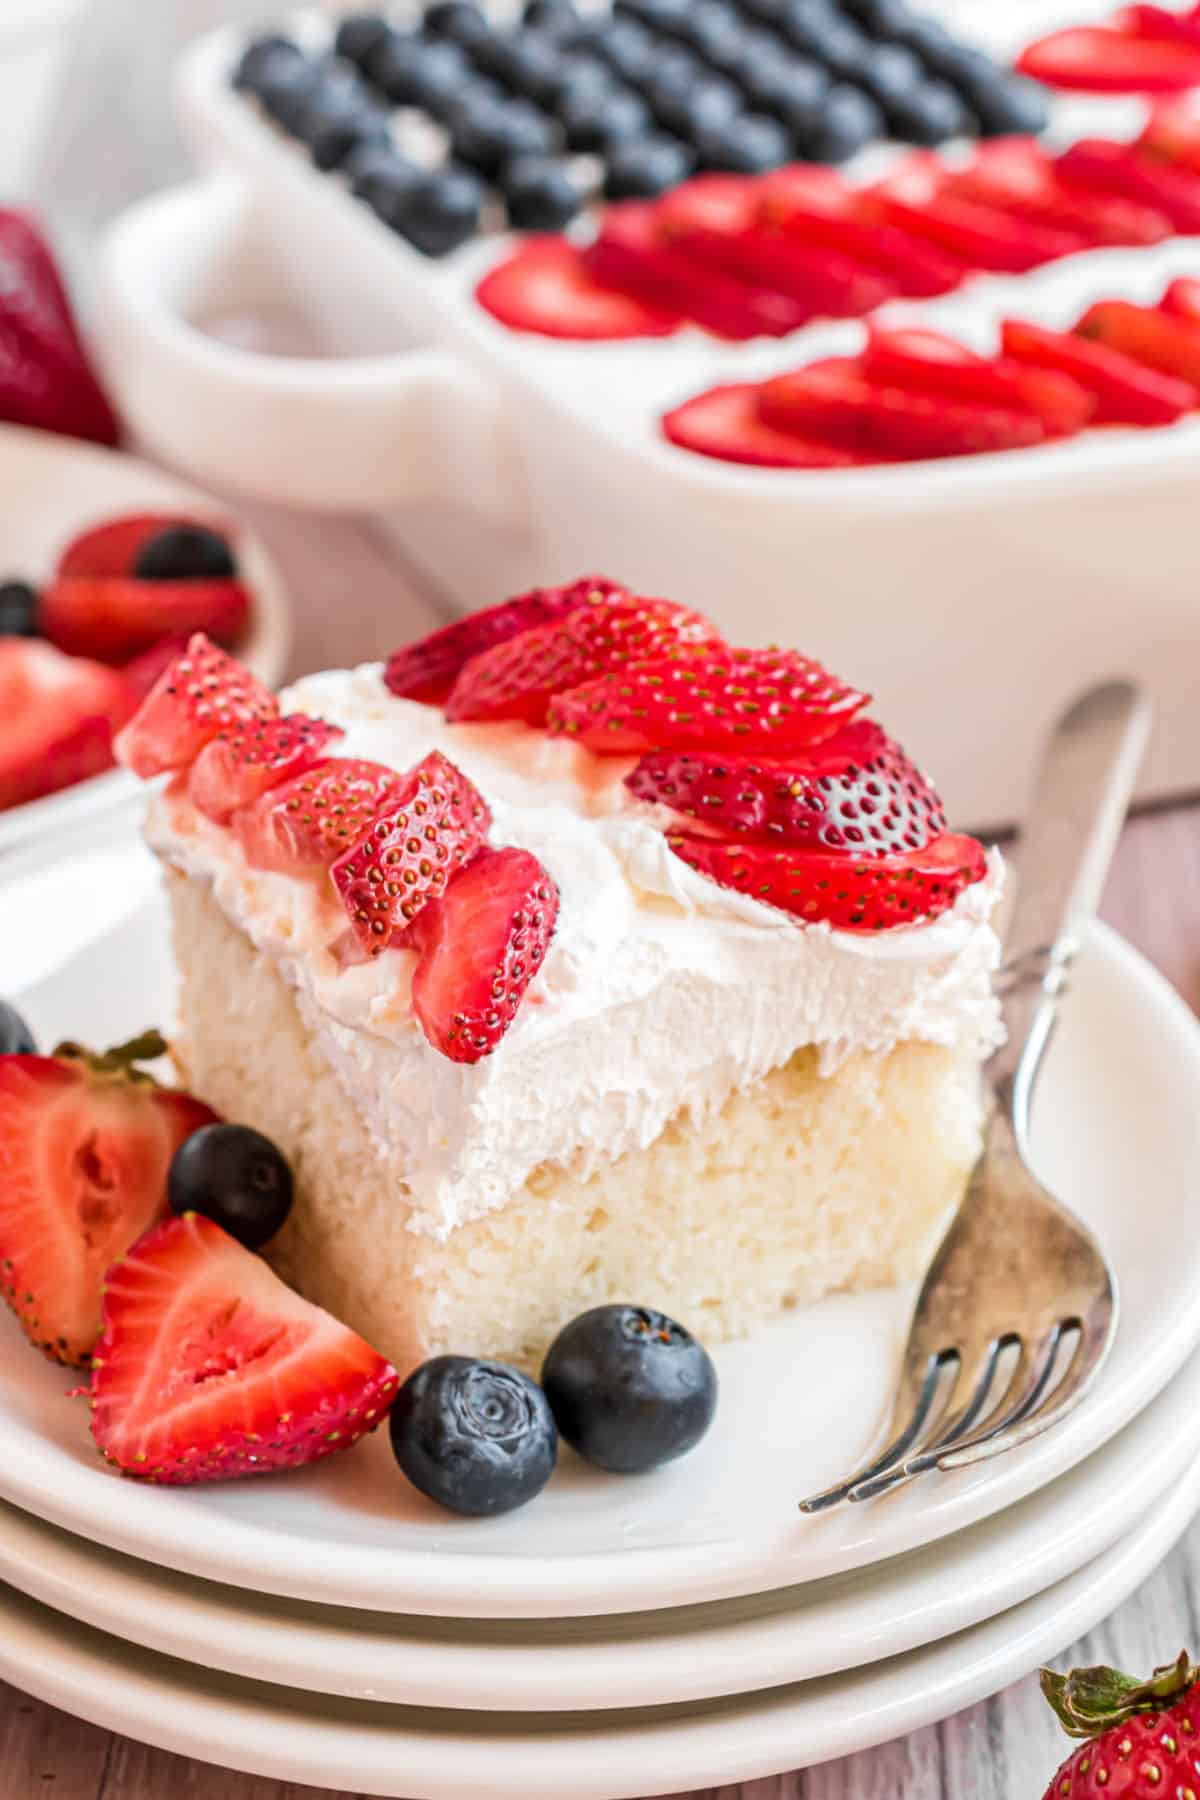 Slice of white cake with whipped cream and berries to resemble a flag.